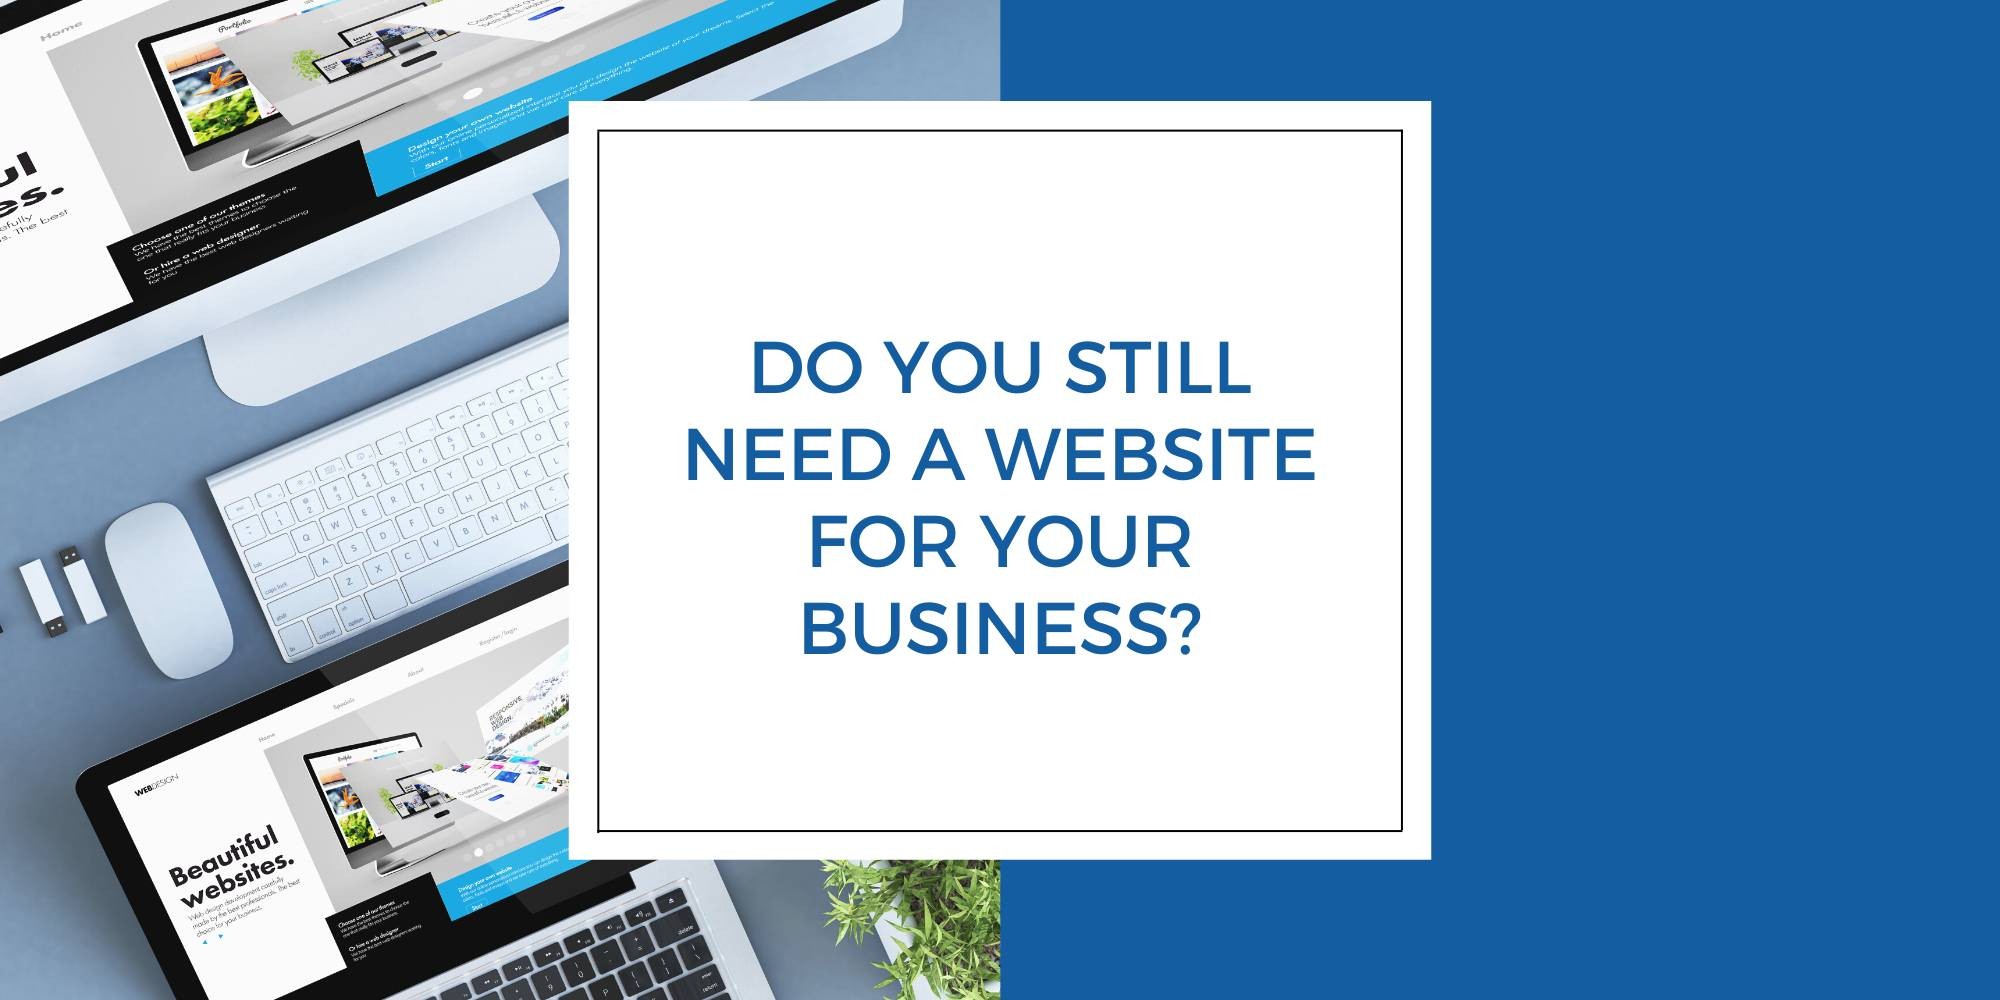 Do you still need a website for your business